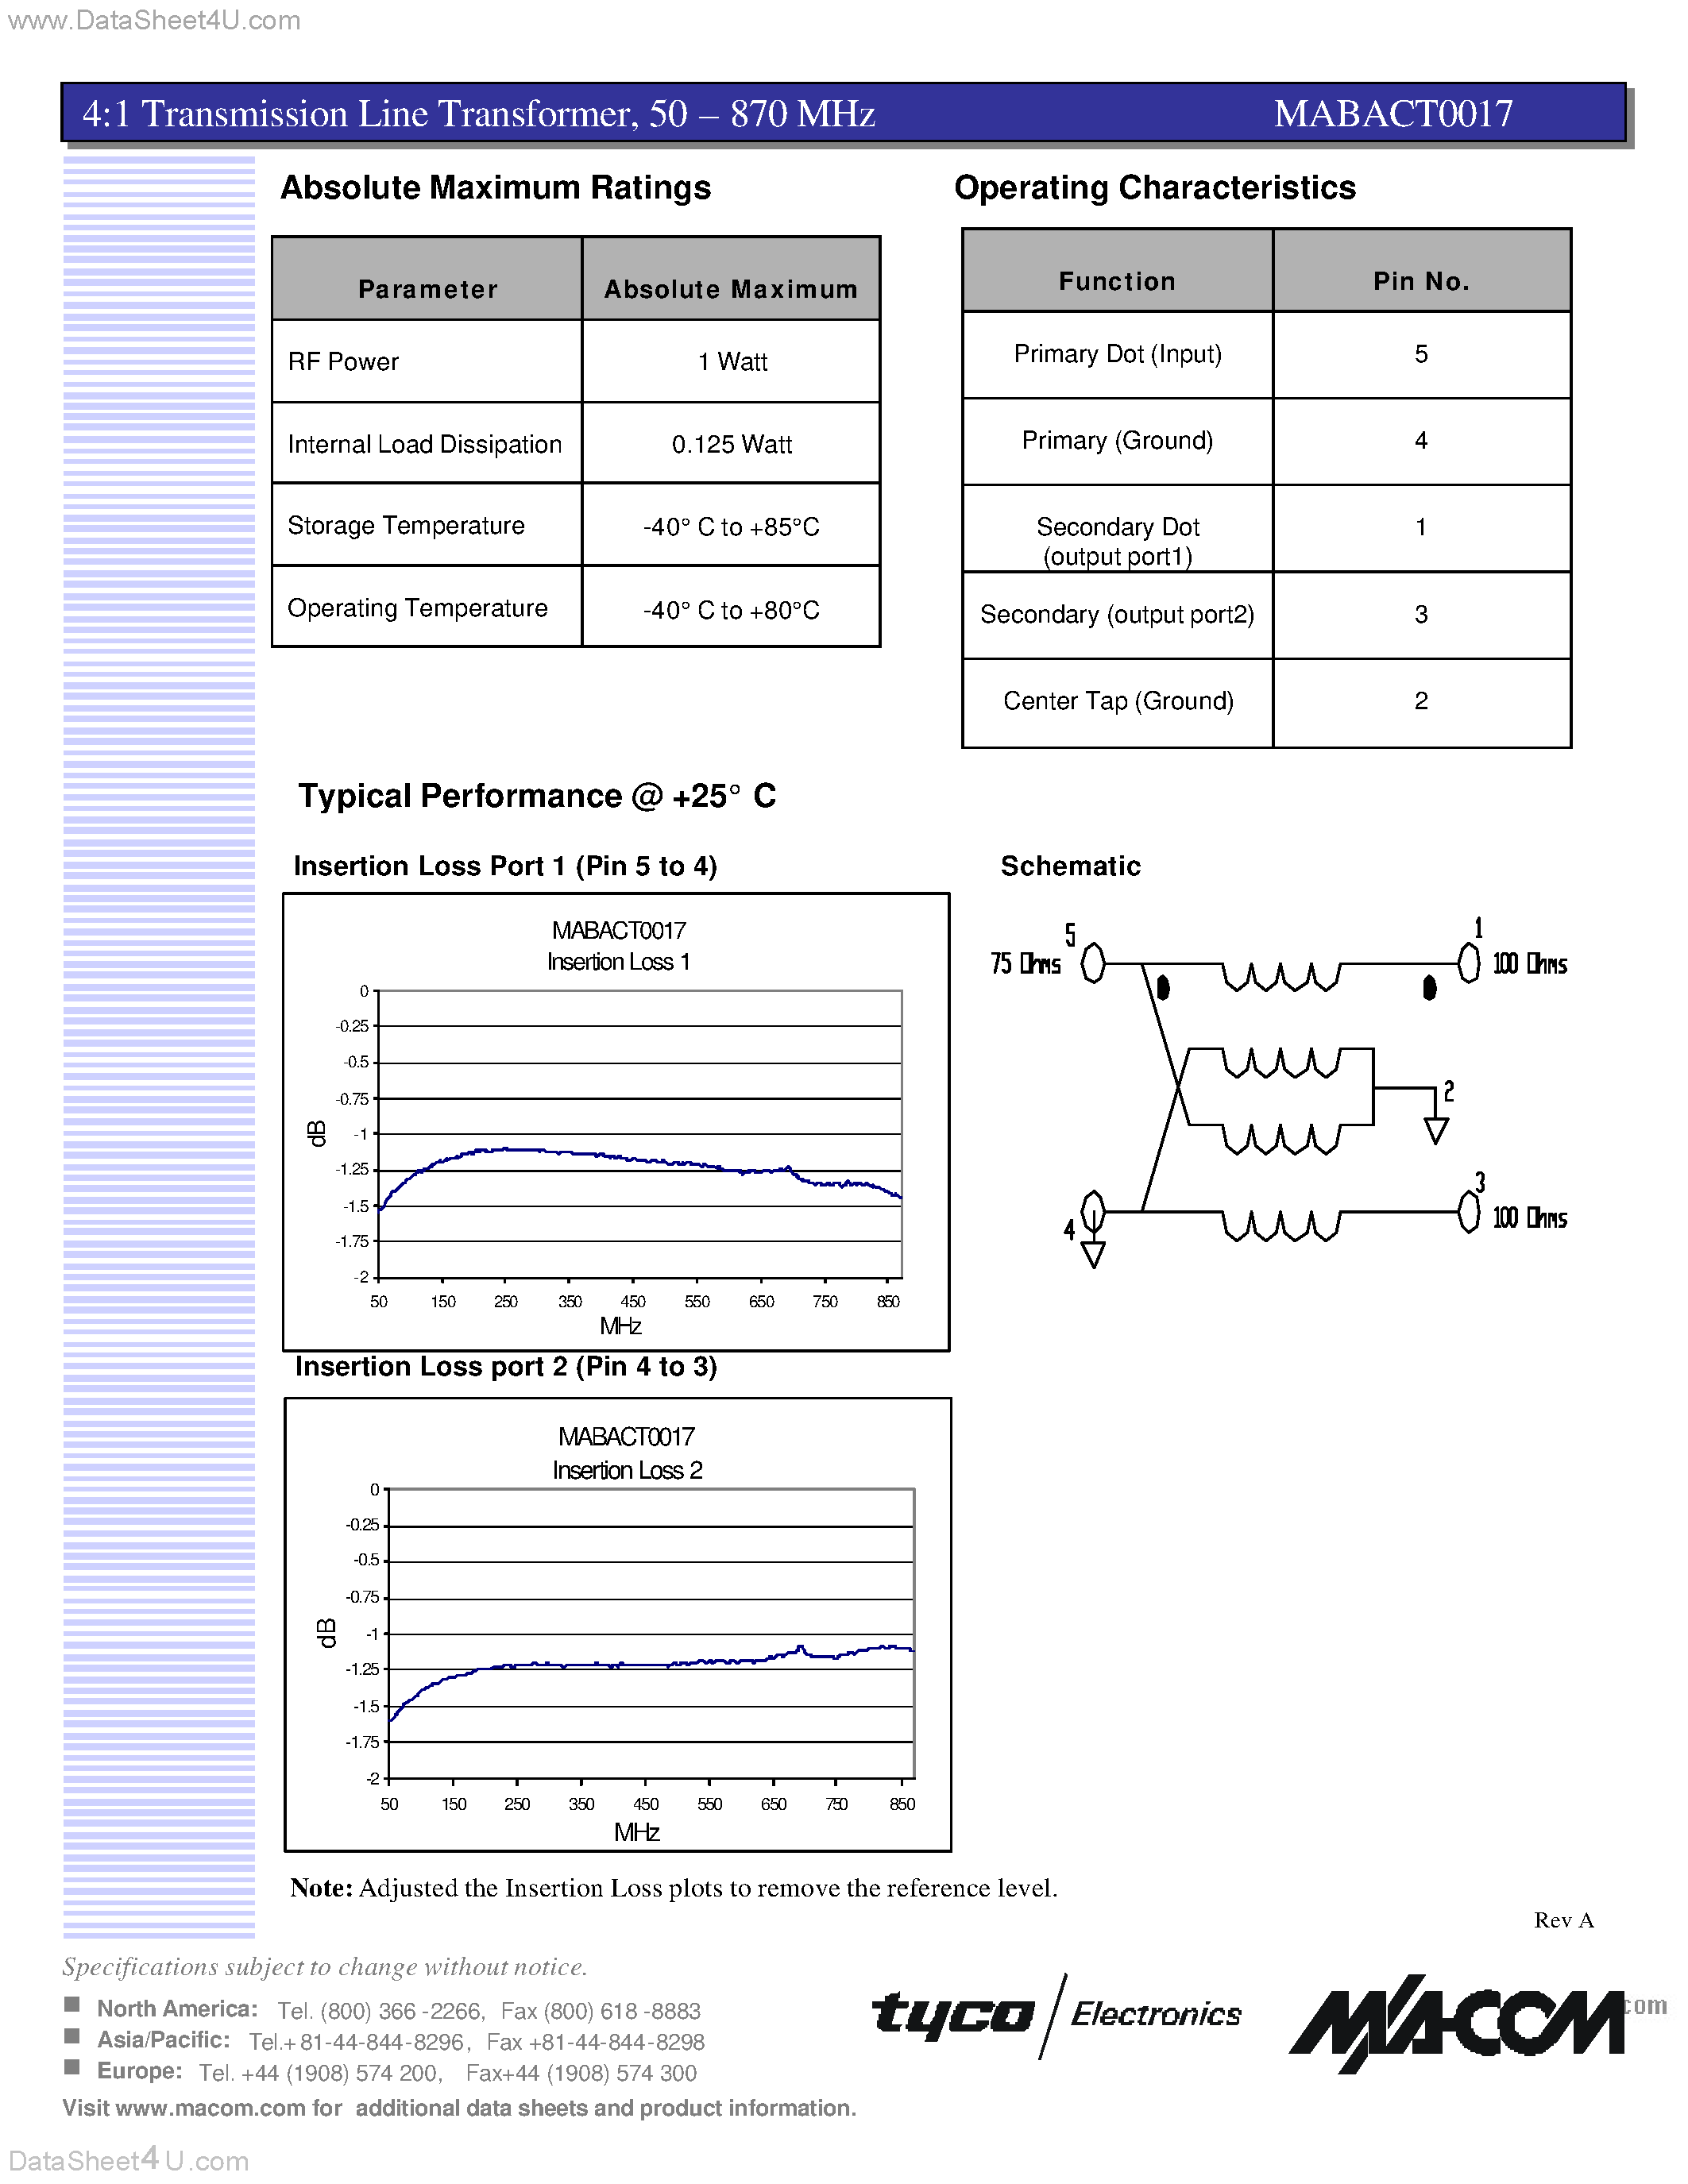 Datasheet MABACT0017 - 4:1 Tx Line Transformer 50-870MHz characterized in a 2.66:1 Z environment page 2